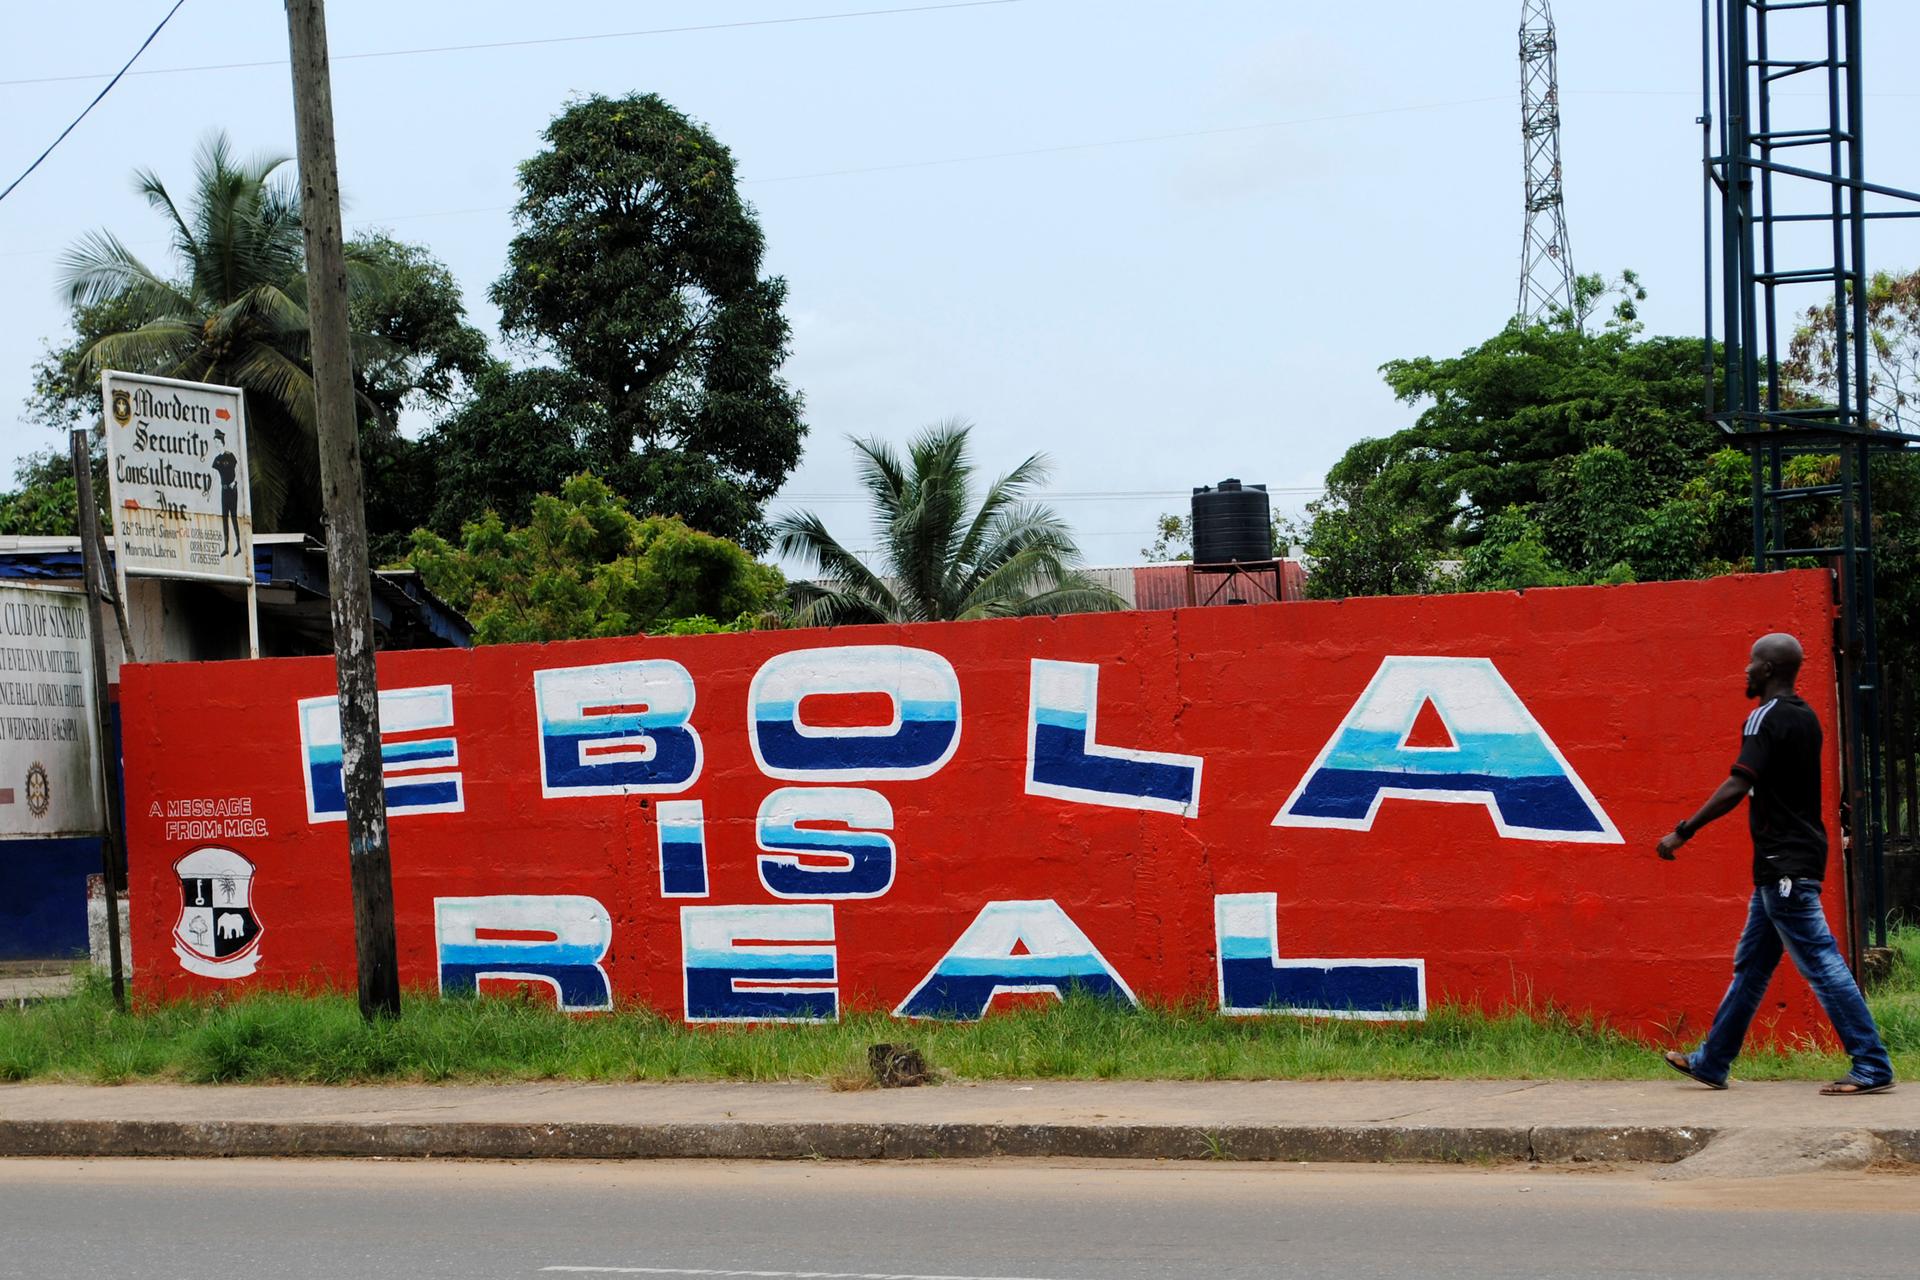 As the Ebola epidemic peaks, new challenges are emerging in Liberia